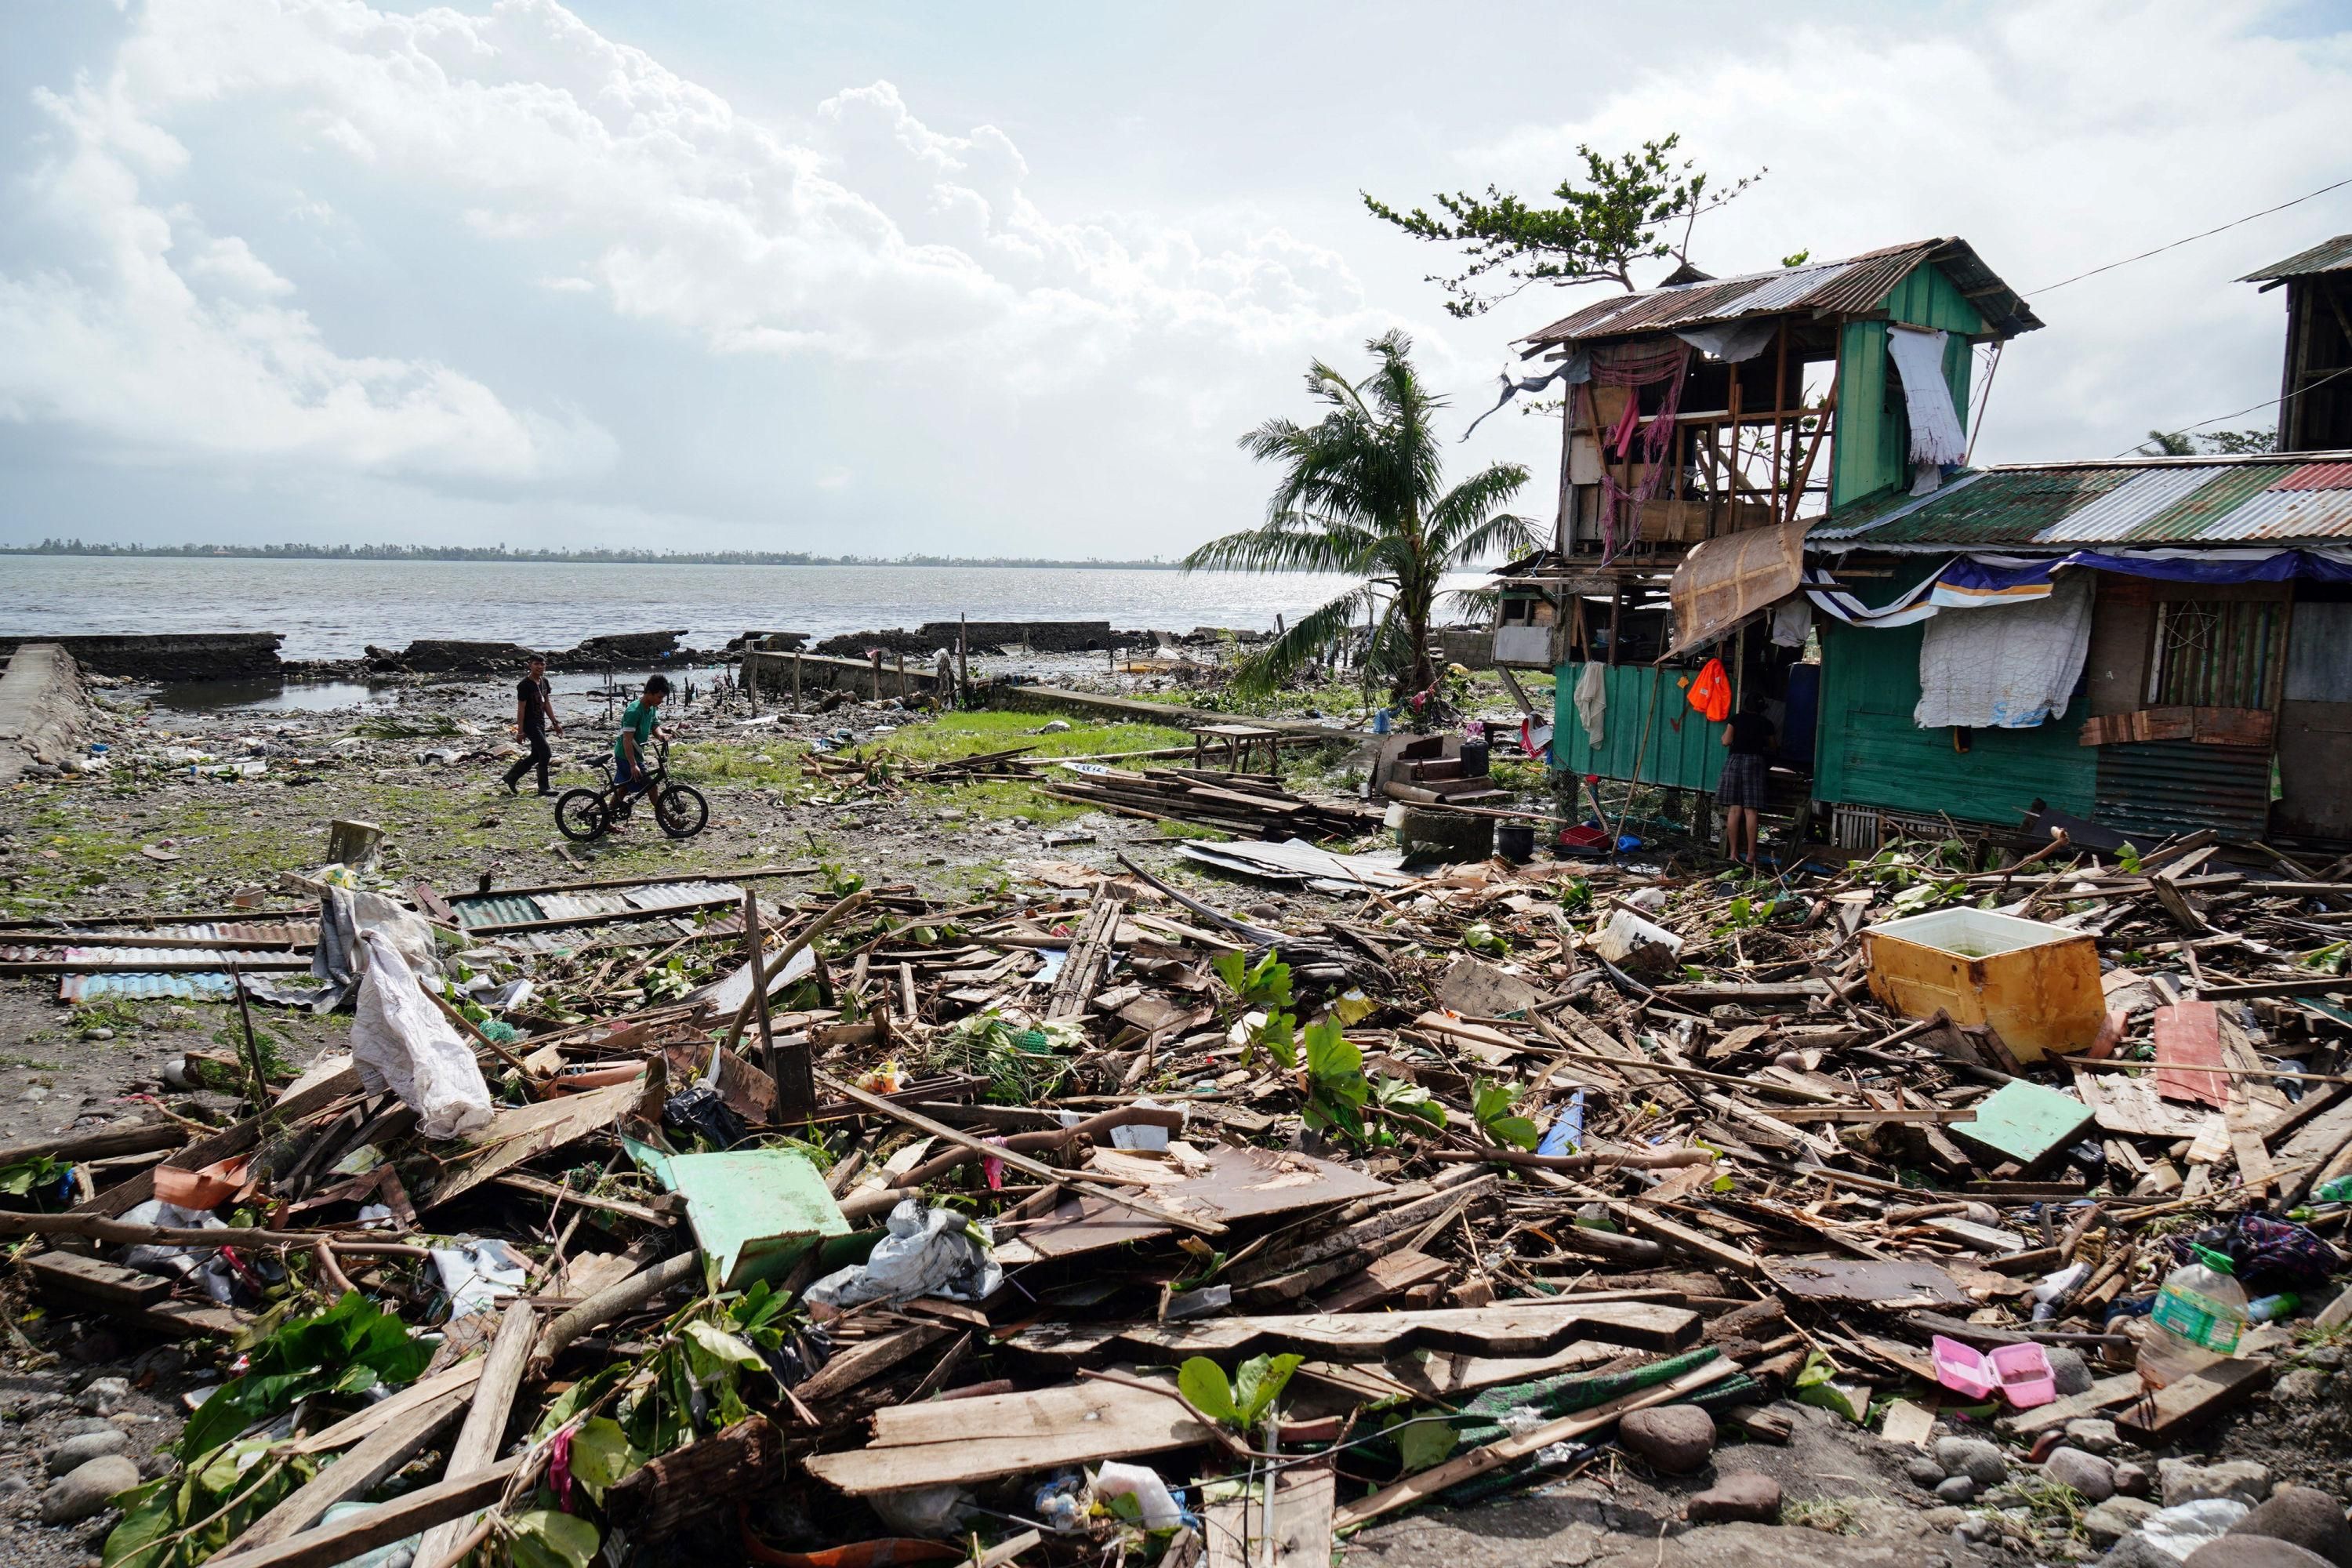 typhoon damage in the philippines in 2019